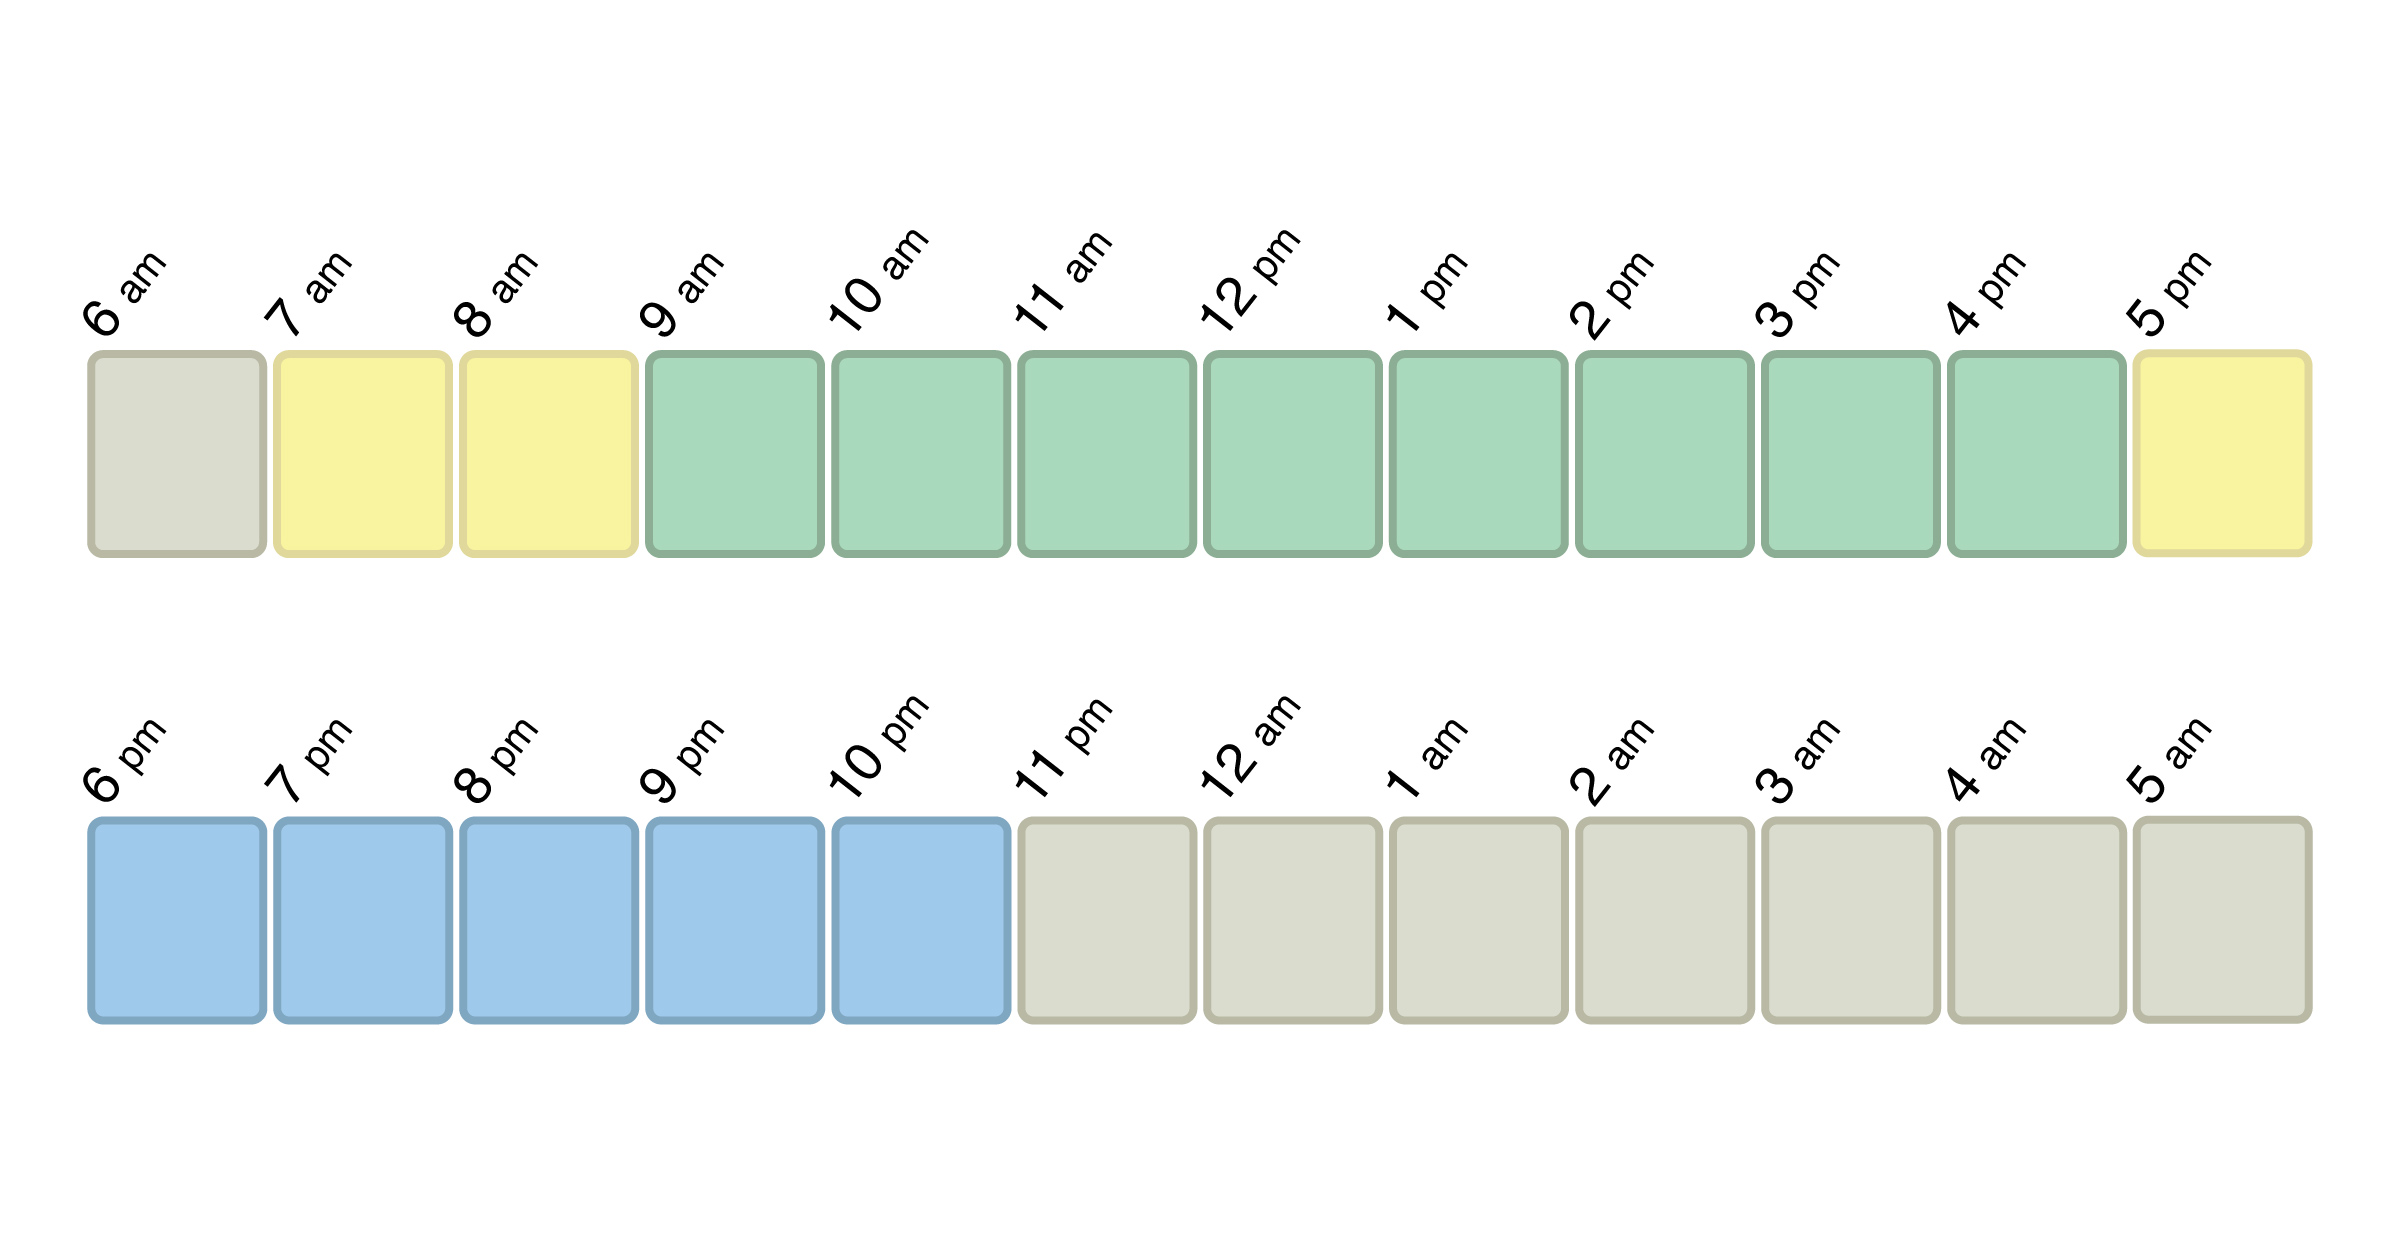 A chart of the hours in a day when you have a job as a designer